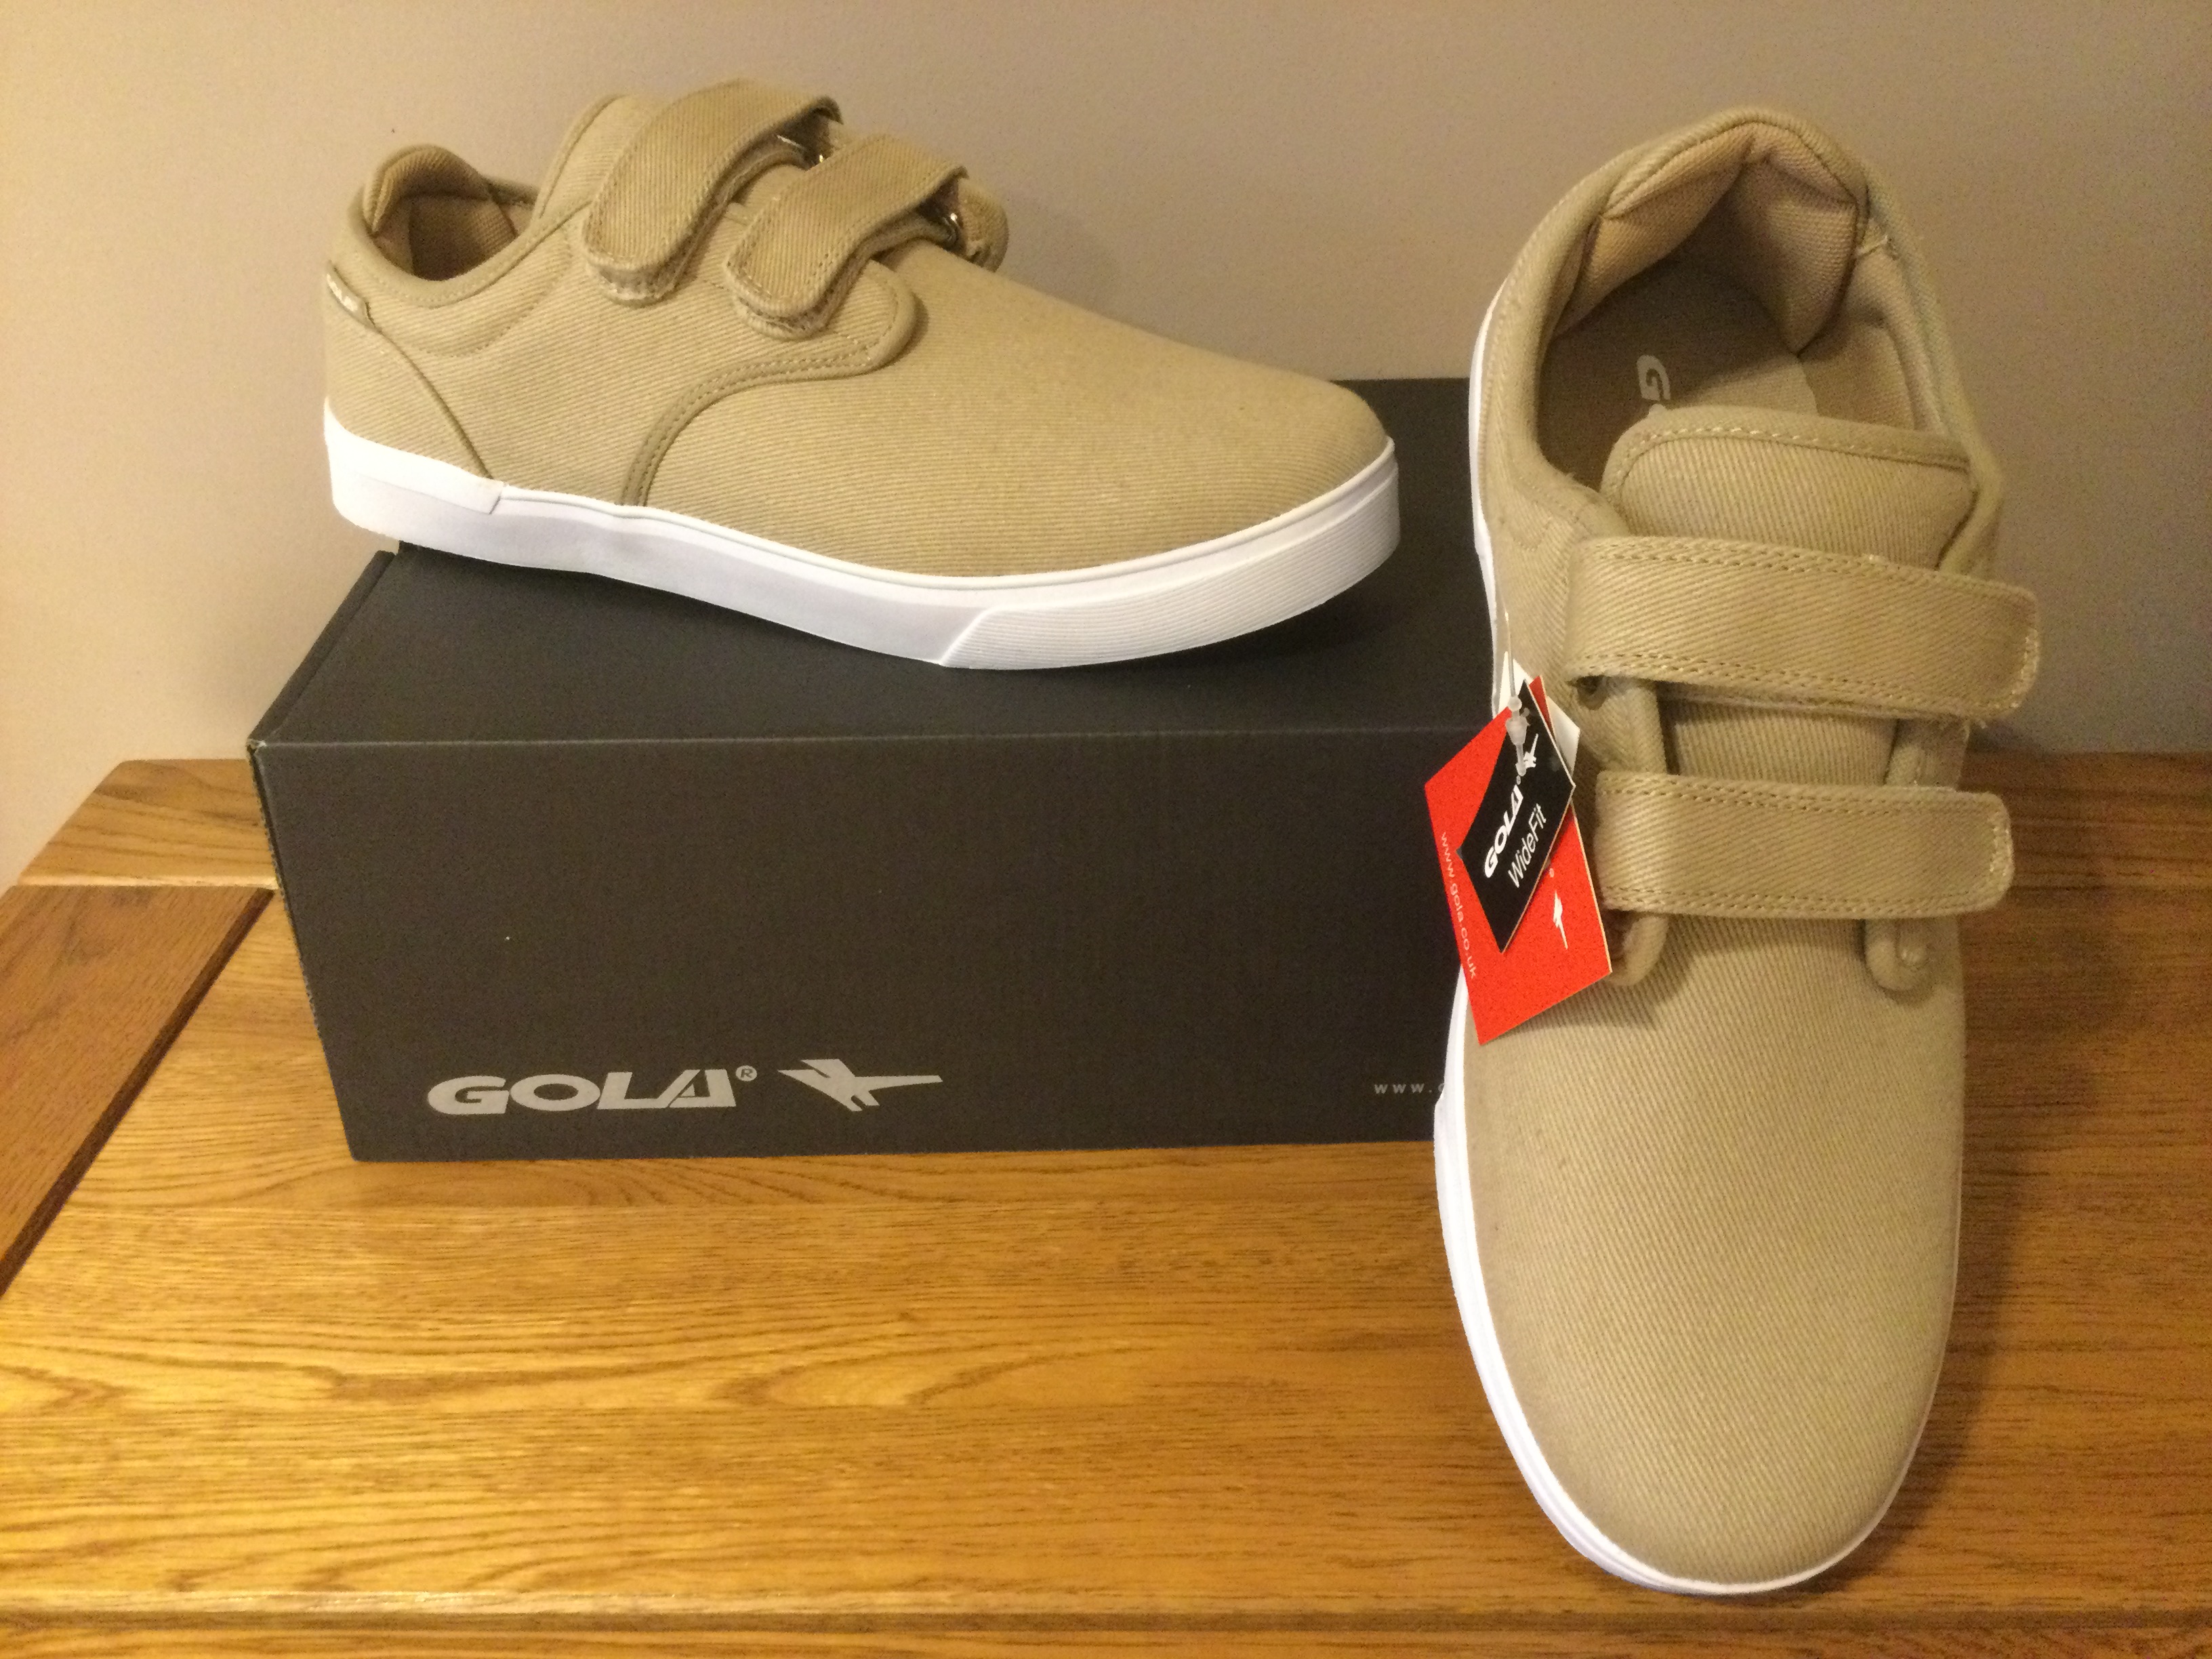 Gola “Panama” QF Mens Wide Fit Trainers, Size 10, Taupe/White - New RRP £36.00 - Image 2 of 5